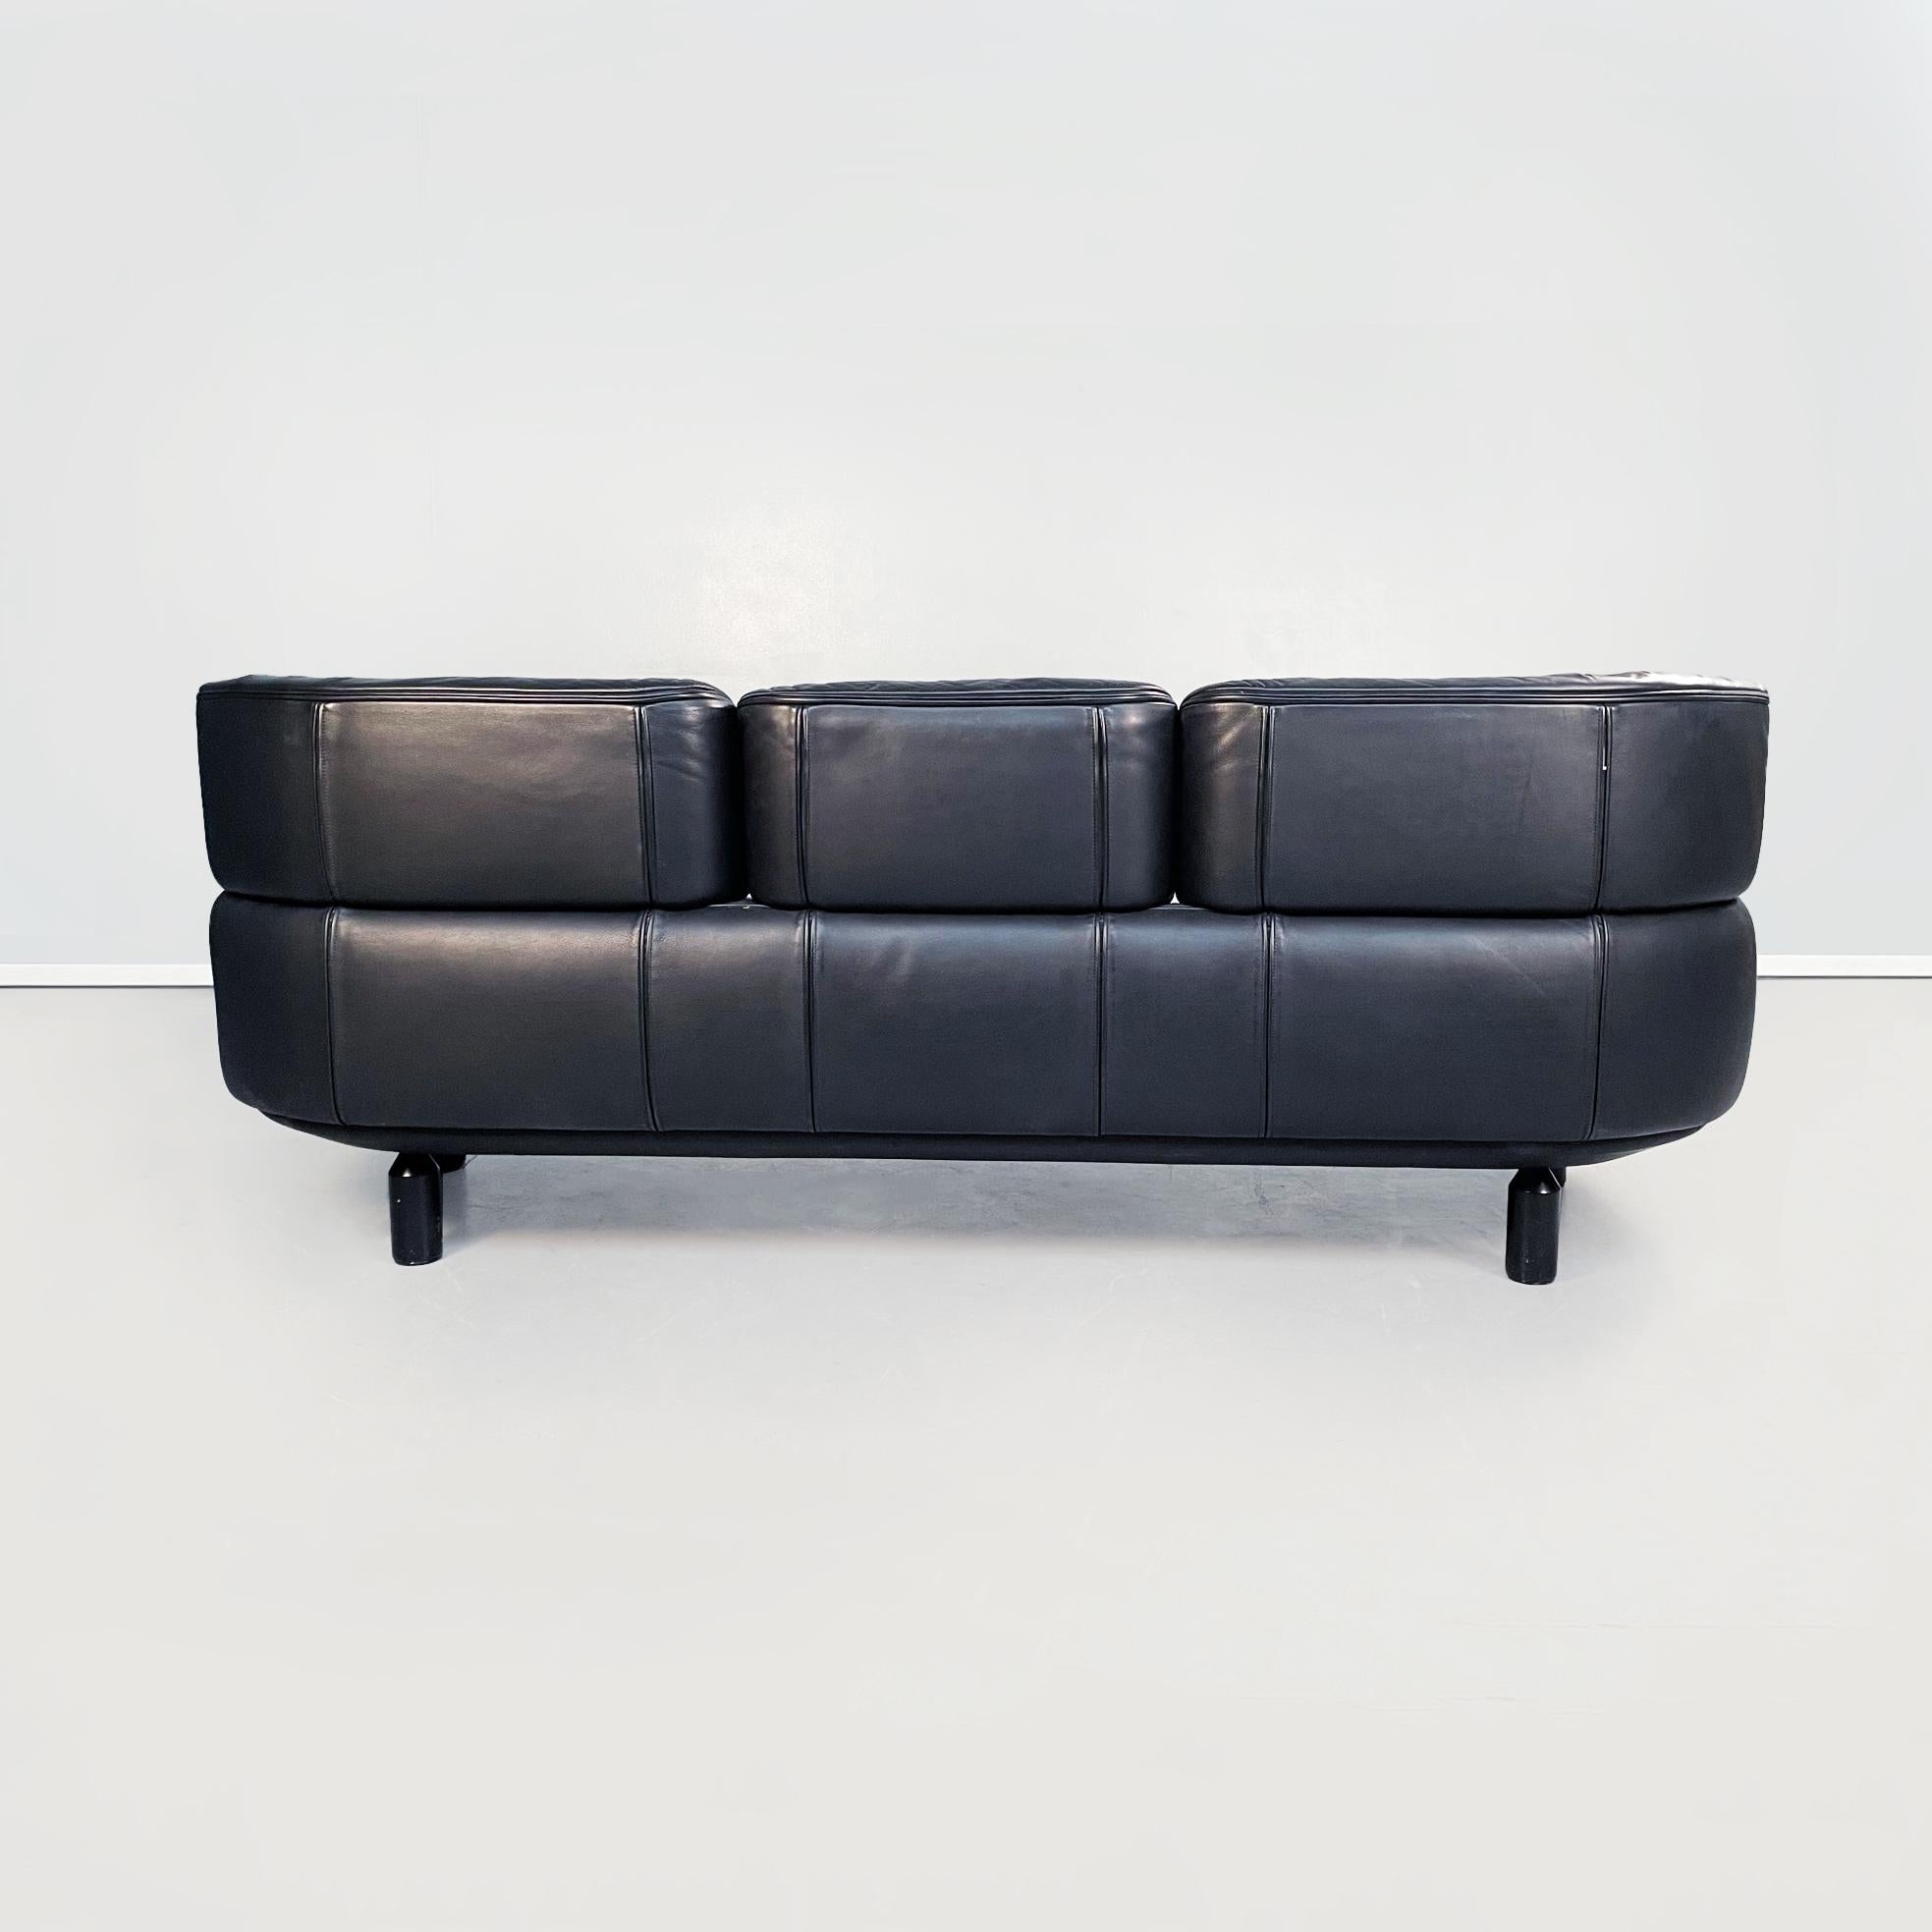 Late 20th Century Italian Modern Black Leather Wood 3seat Sofa Bull by Frattini for Cassina, 1980s For Sale